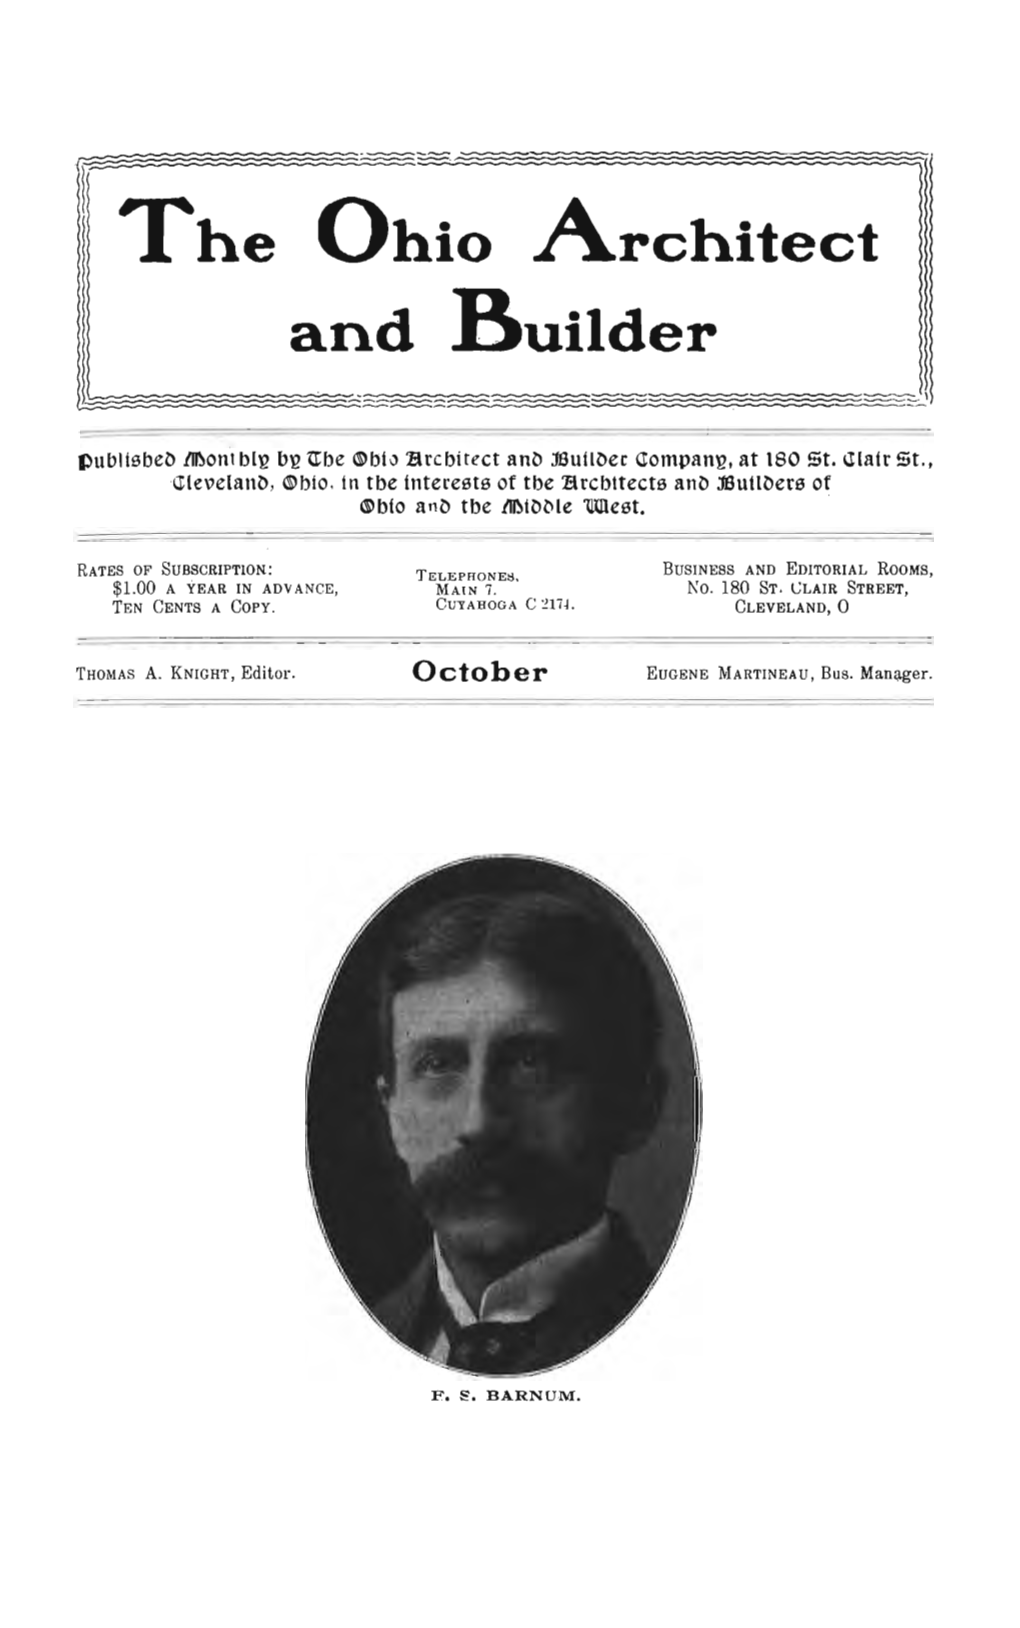 The Ohio Architect and Builder